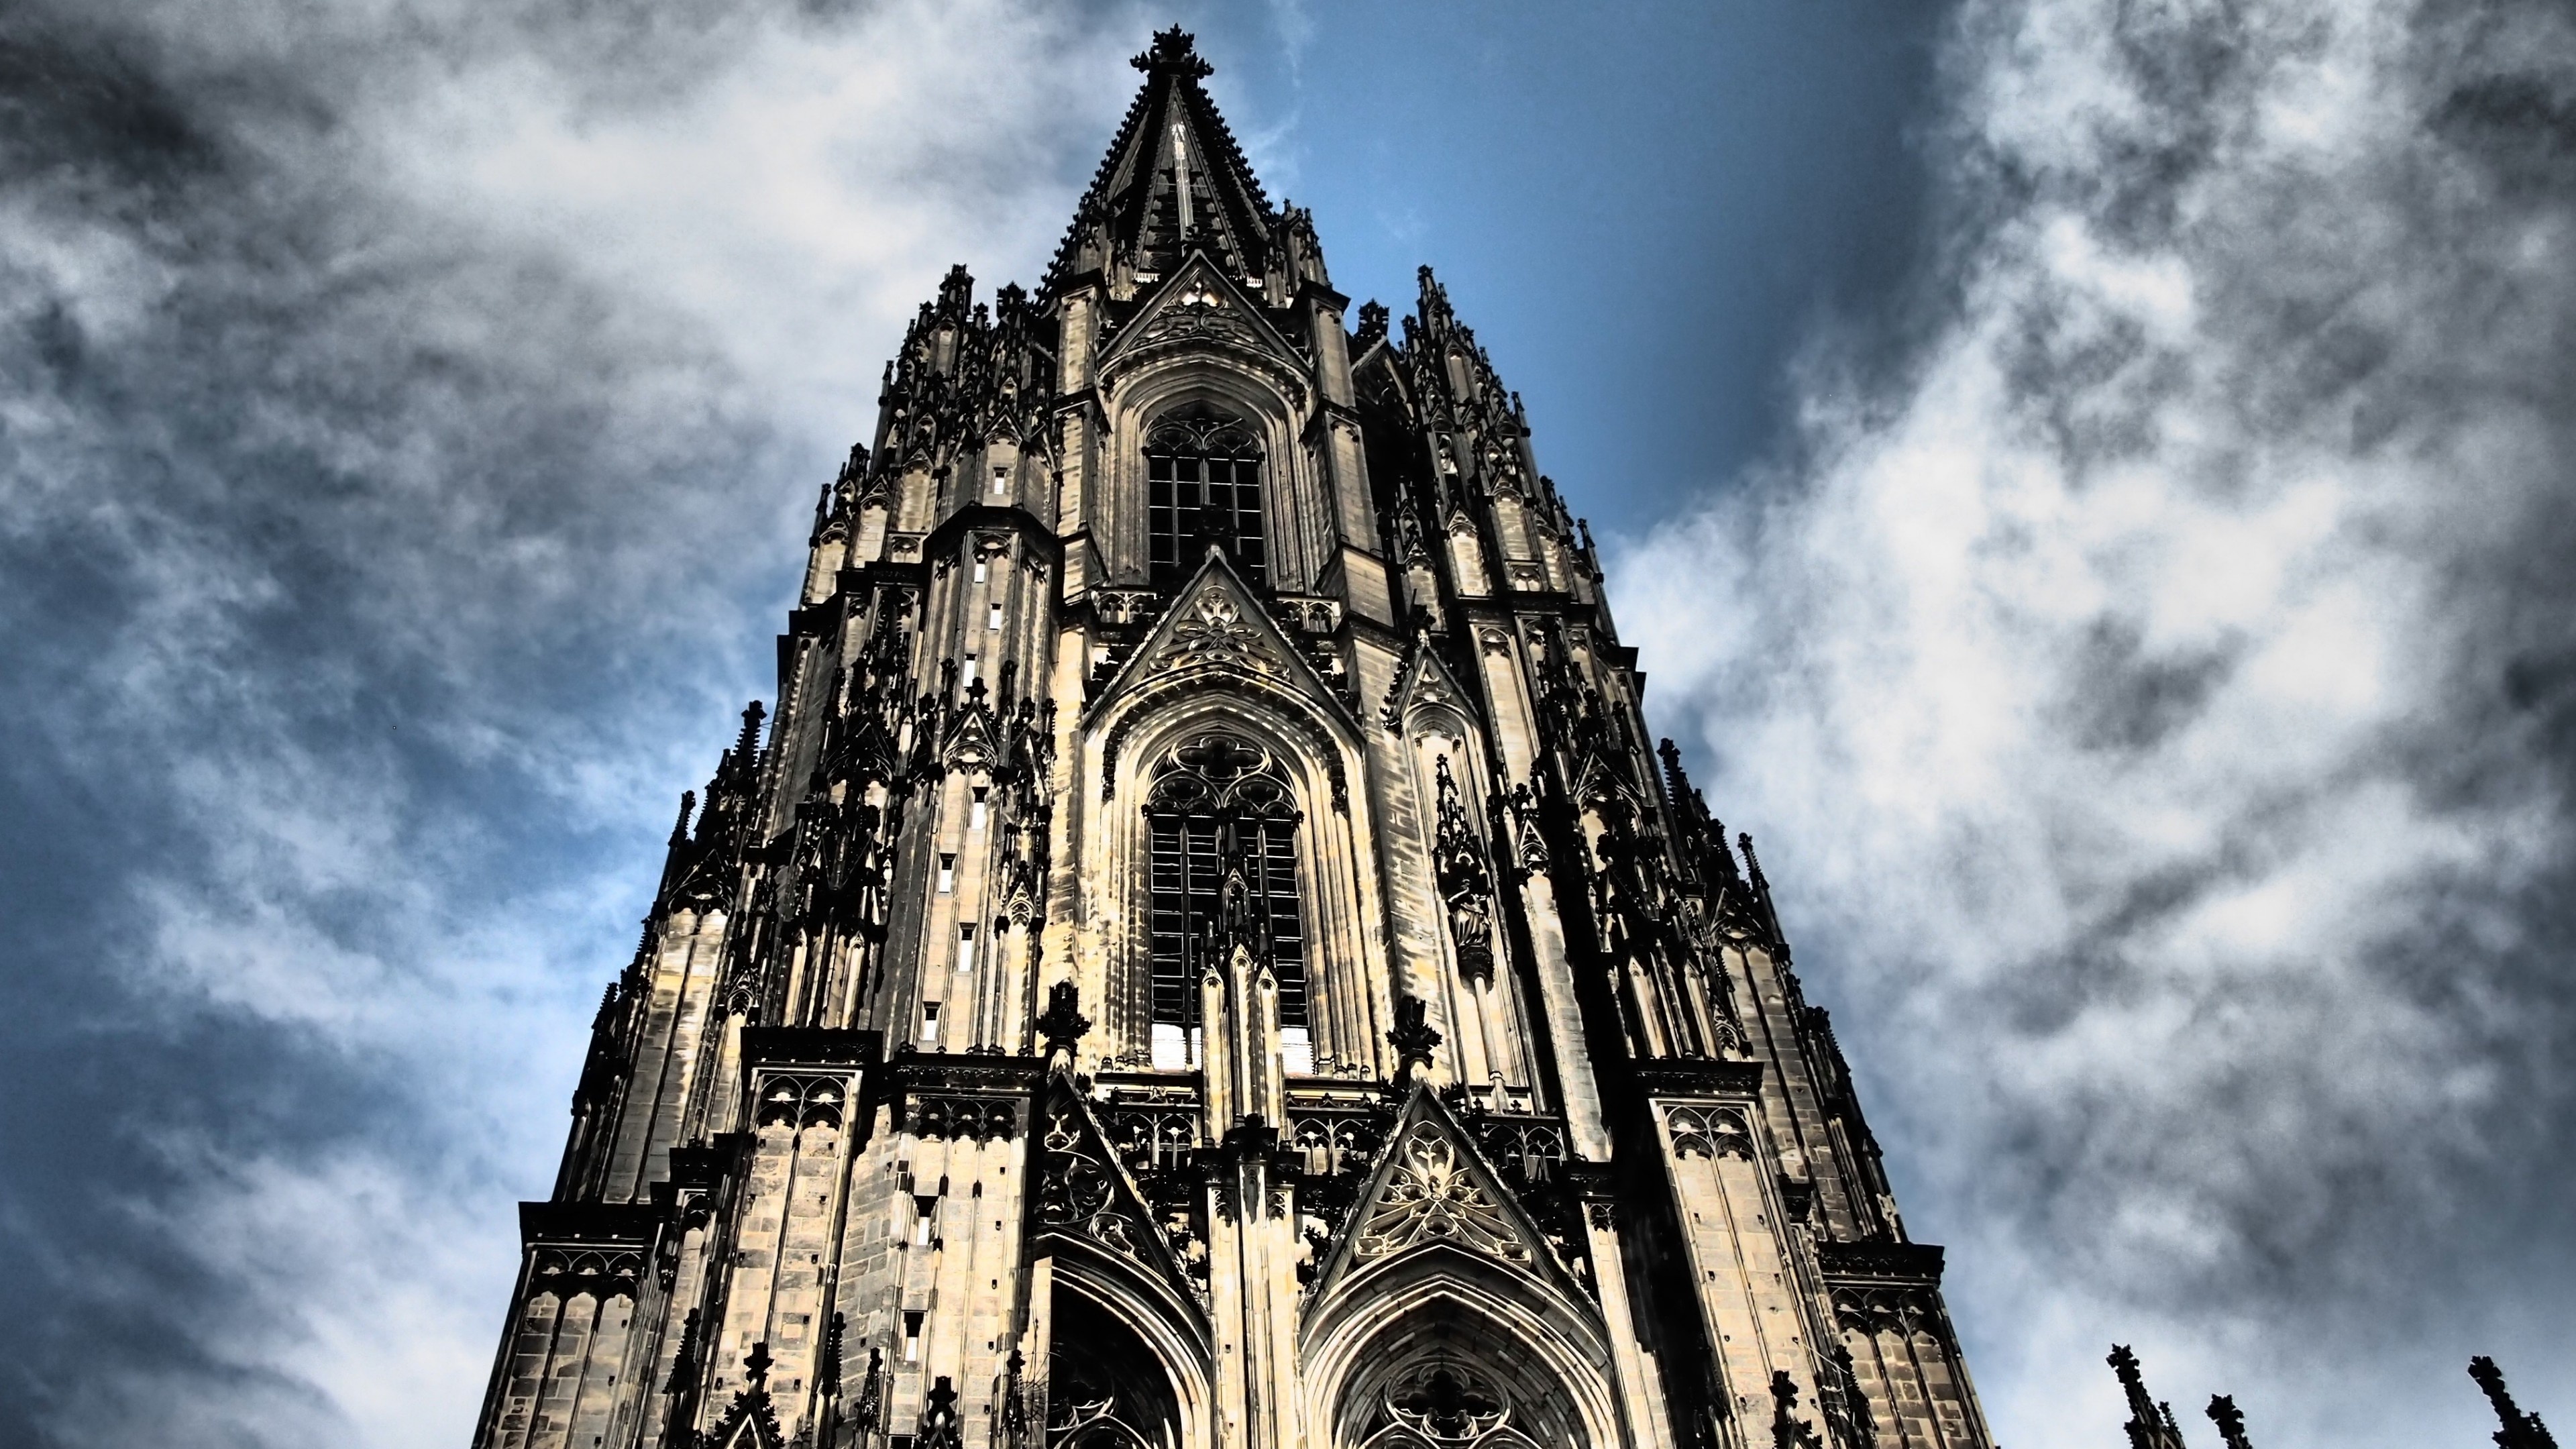 Gothic Architecture: Cologne Cathedral, Germany, Europe, Tower, Spire, Middle Age French Style. 3840x2160 4K Wallpaper.